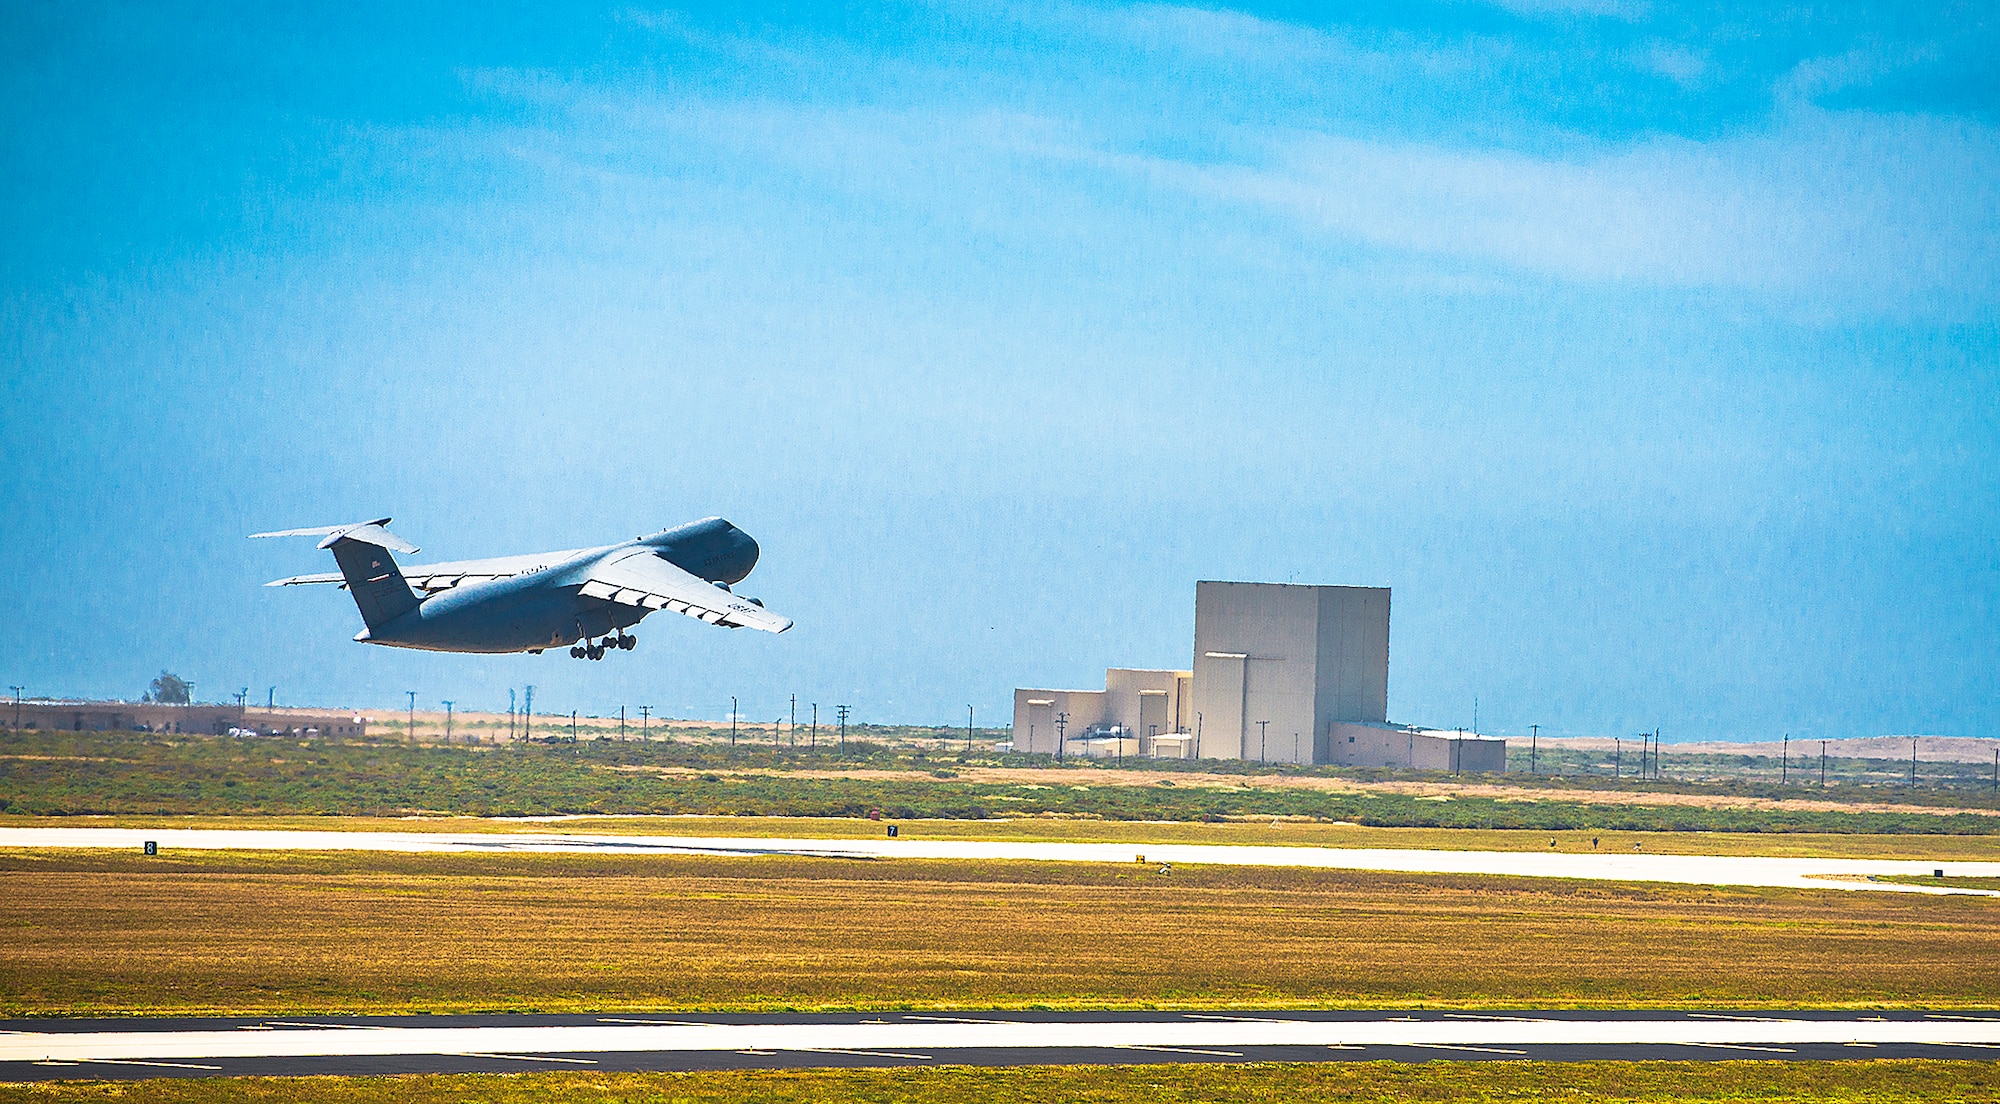 A 433rd Airlift Wing C-5M Super Galaxy aircraft takes off from Vandenberg Air Force Base, California during exercise Patriot Hook April 27, 2017. Patriot Hook is an annual joint-service exercise coordinated by the Air Force Reserve, designed to integrate the military and first responders of federal, state and local agencies by providing training to mobilize quickly and deploying in military aircraft in the event of a regional emergency or natural disaster. (U.S. Air Force photo by Benjamin Faske)

